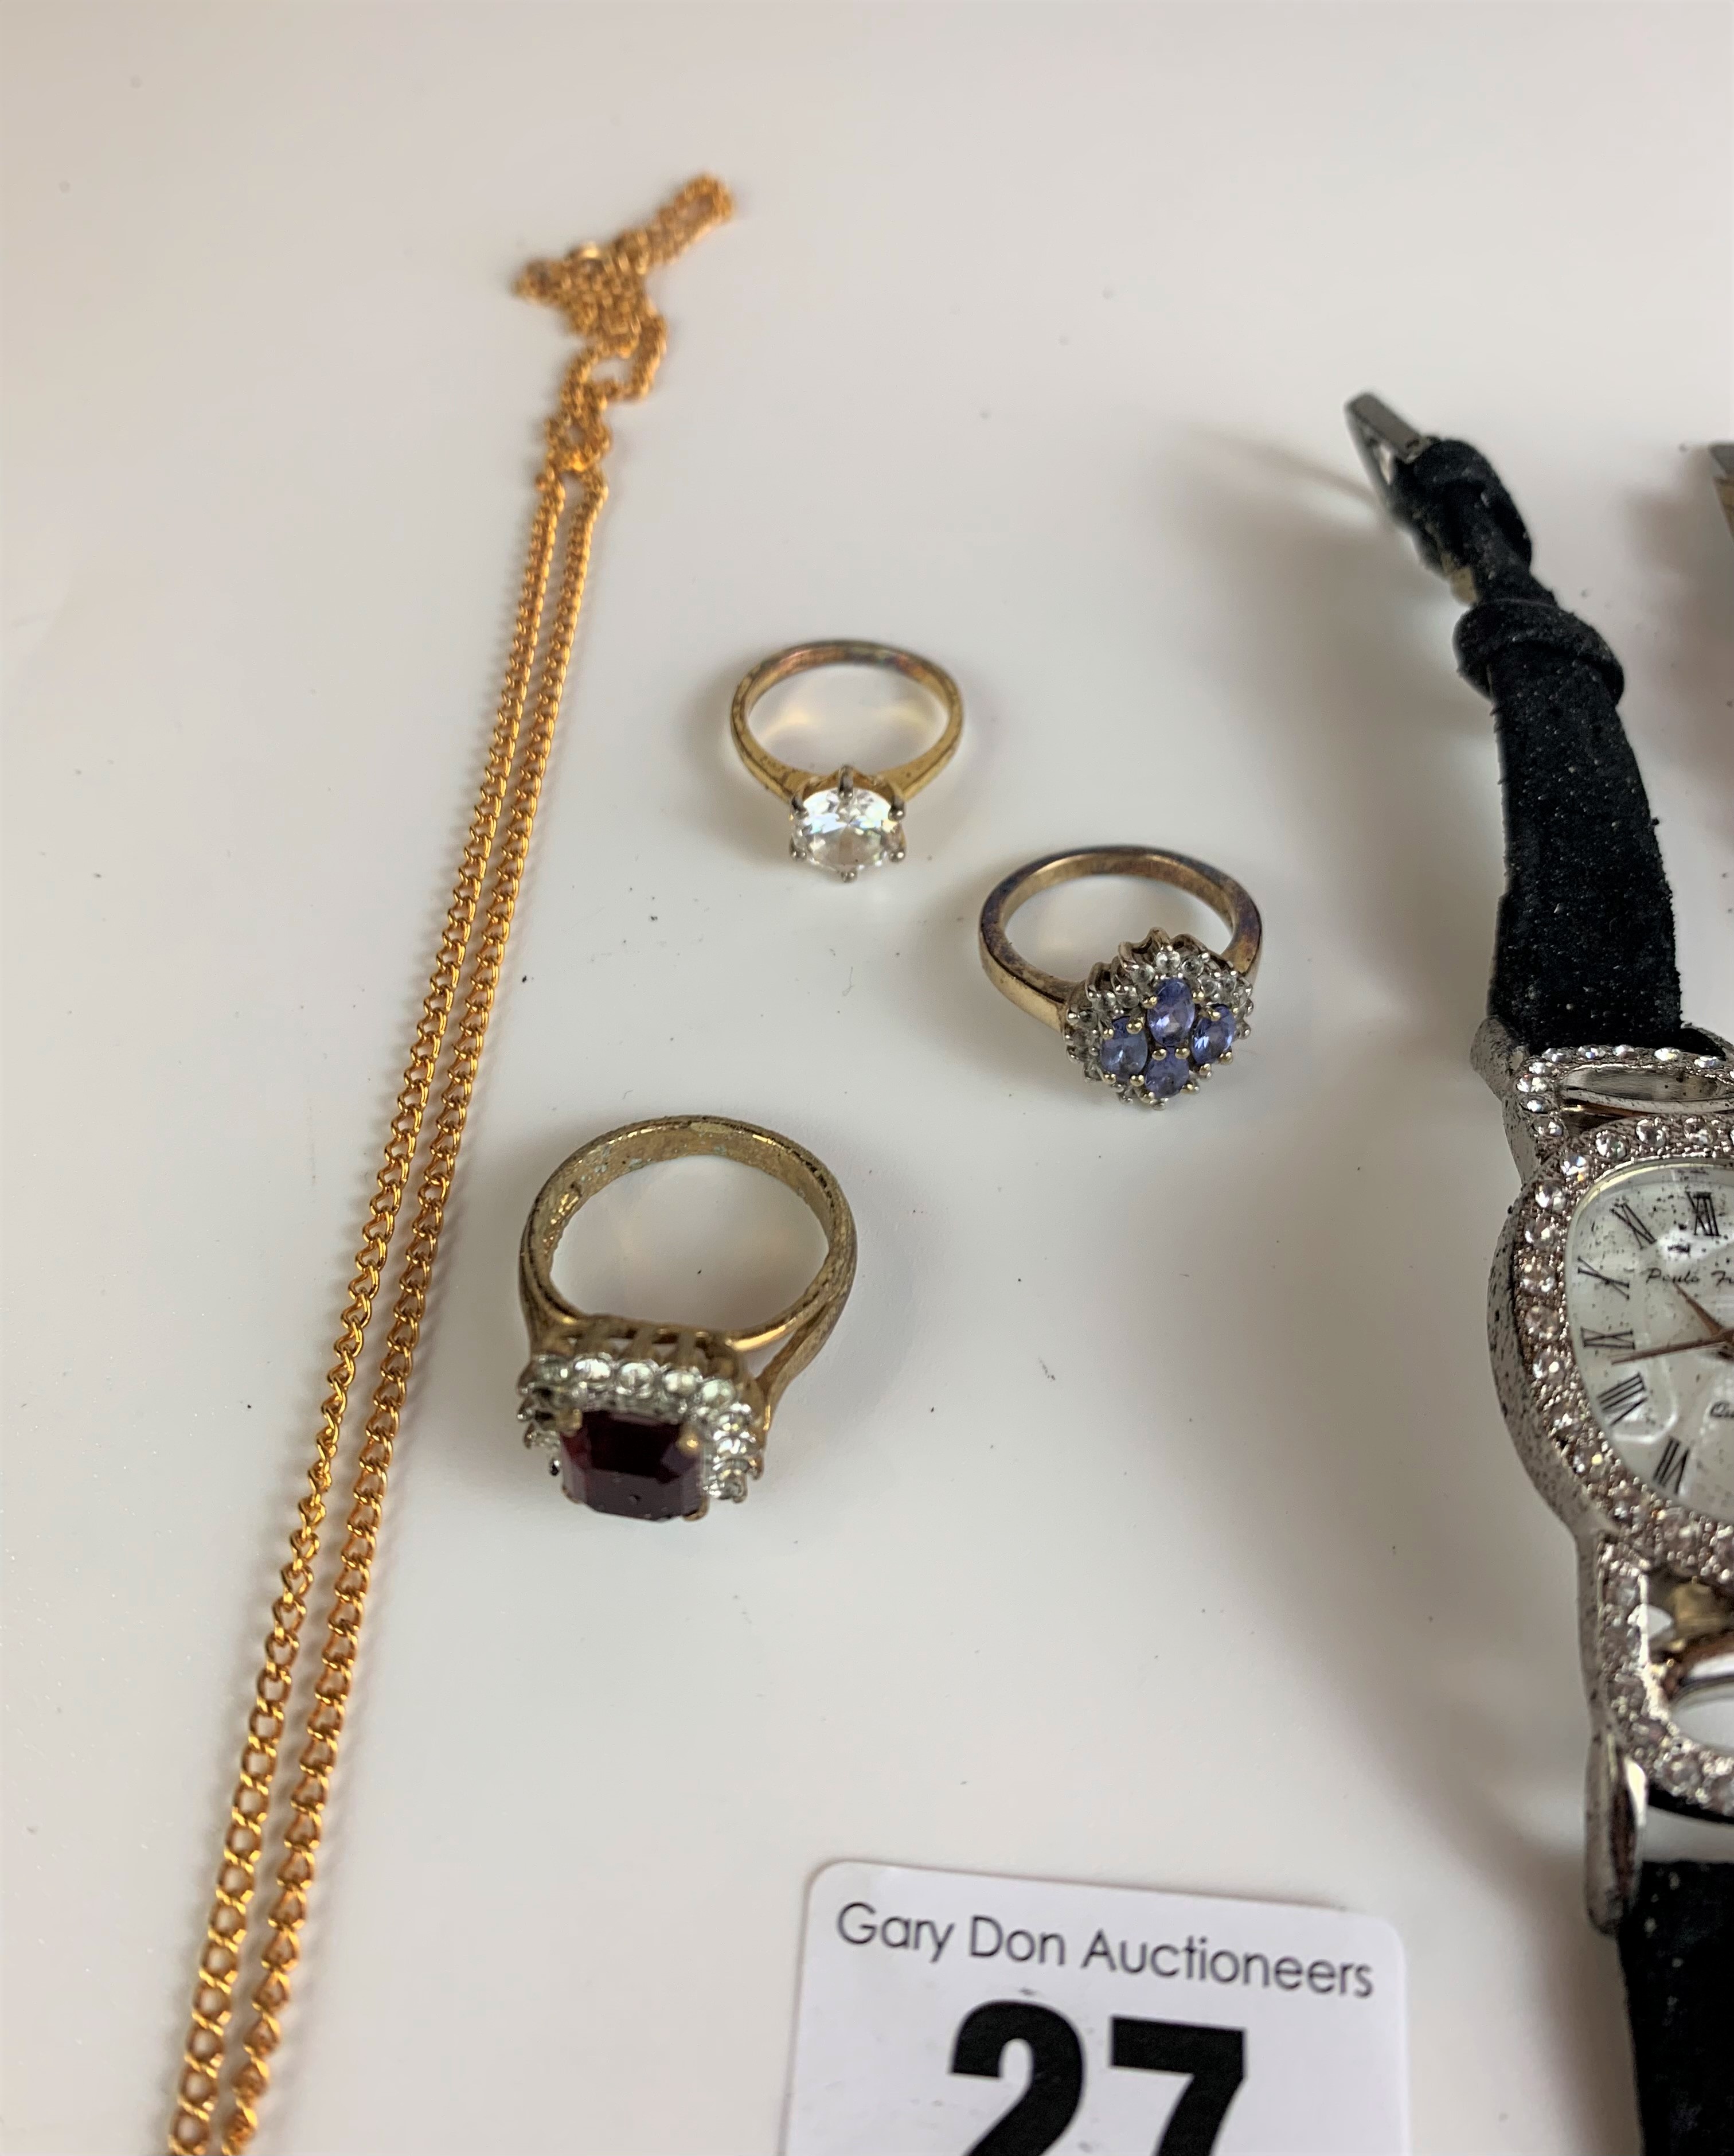 Dress jewellery – watch, bracelet, necklace with locket and 3 rings - Image 2 of 5